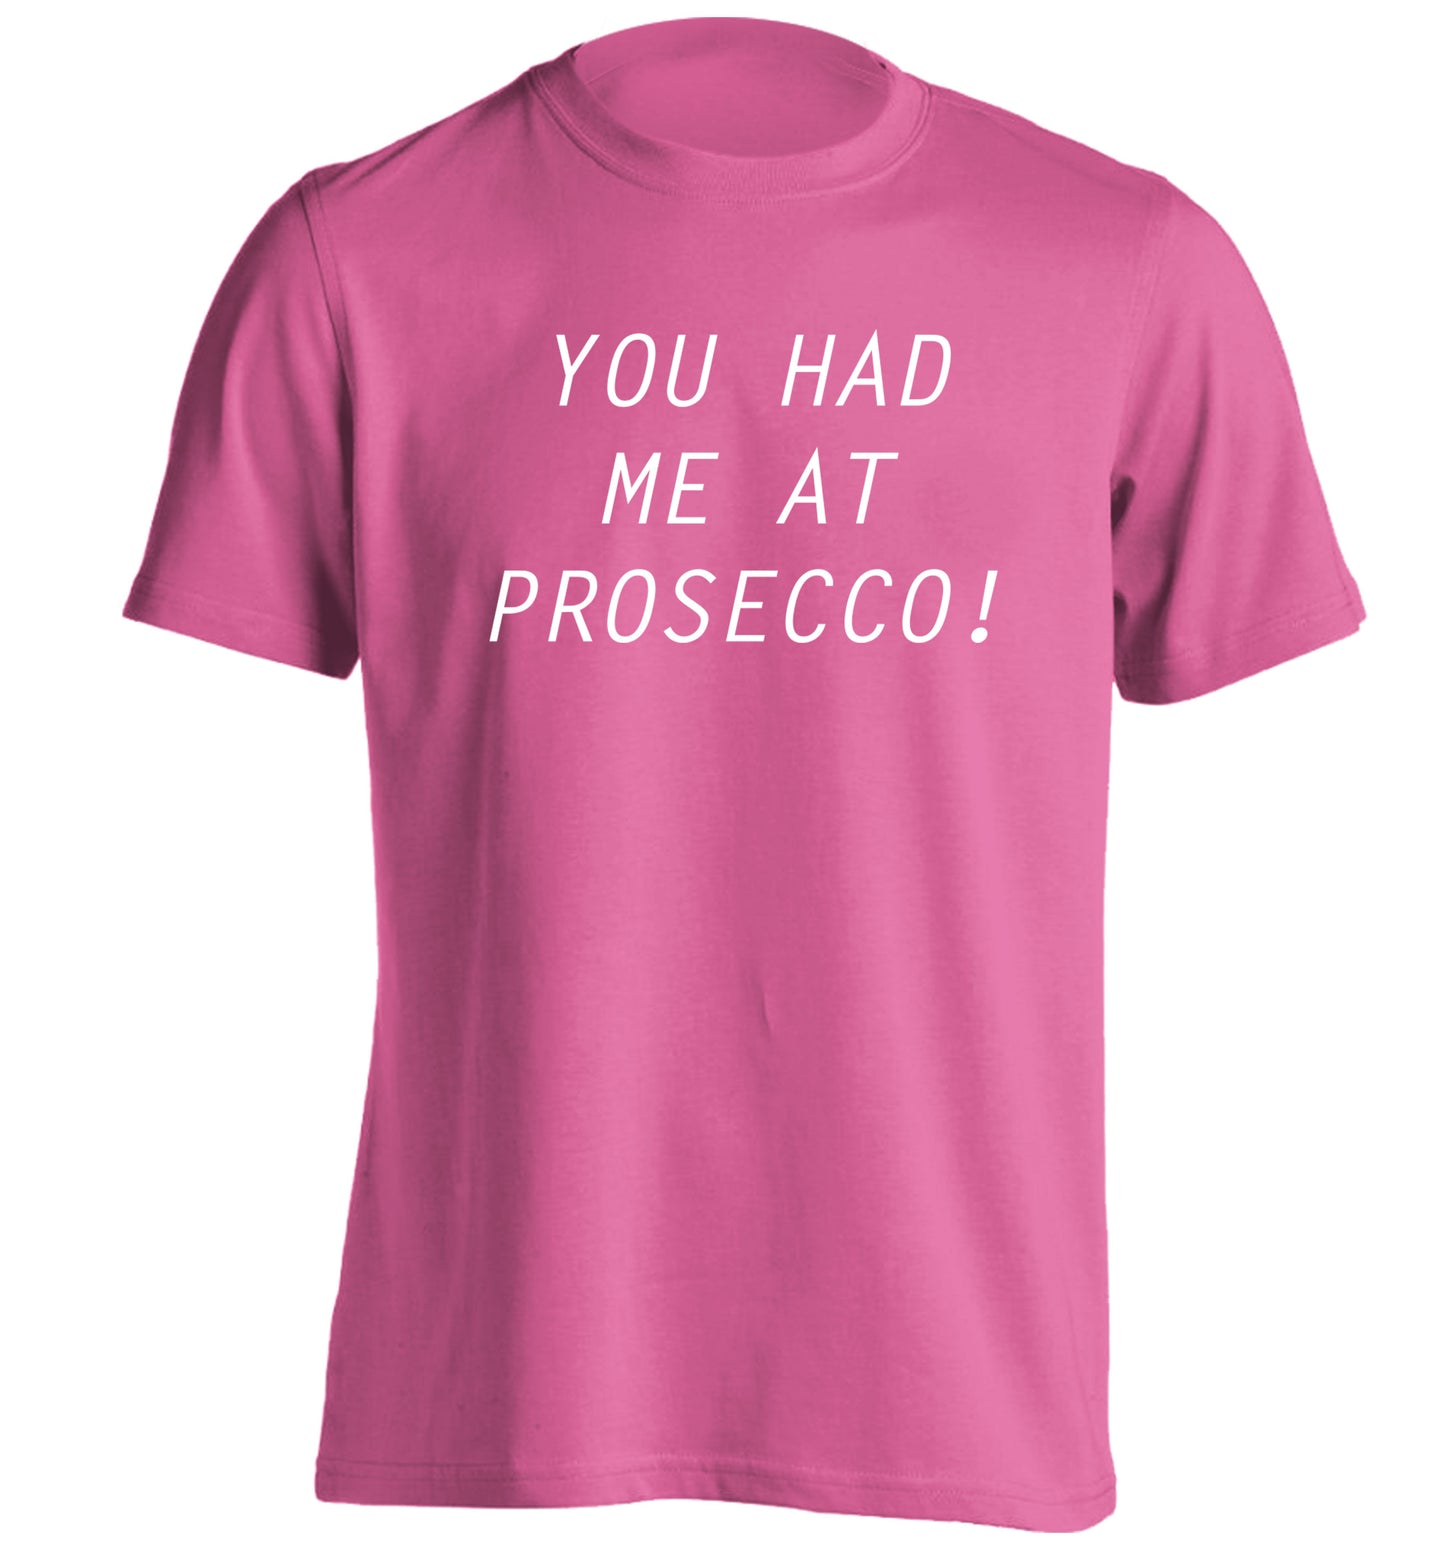 You had me at prosecco adults unisex pink Tshirt 2XL